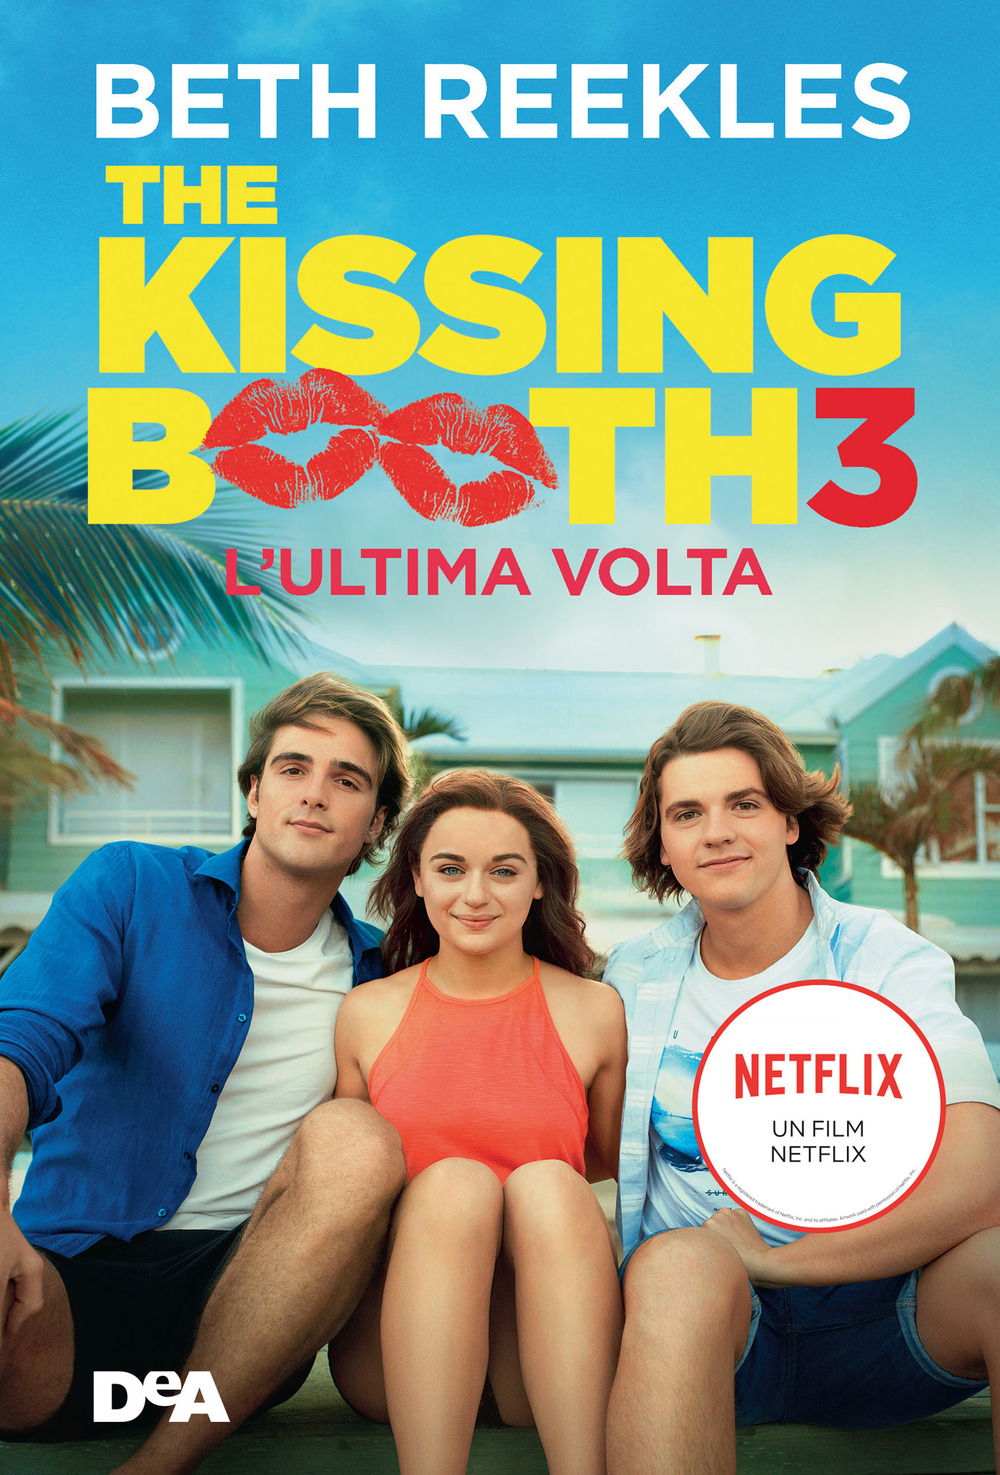 The kissing booth 3. L'ultima volta